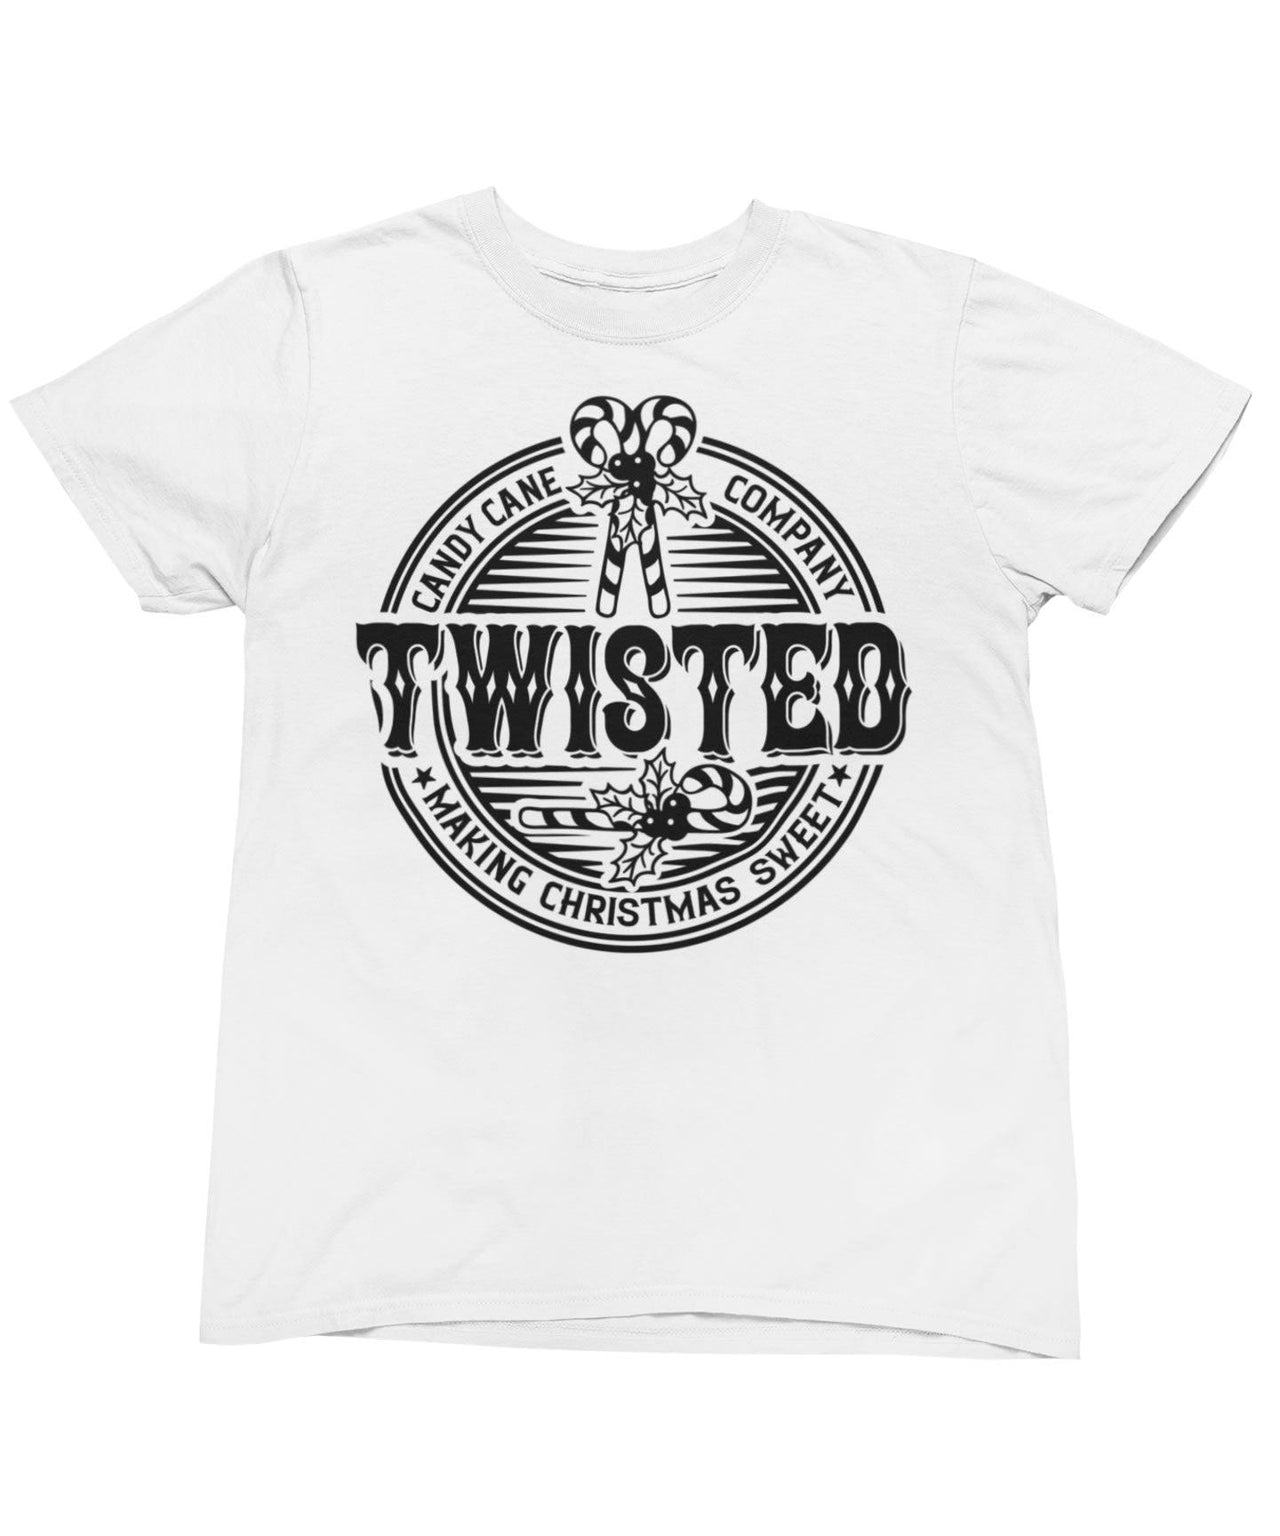 Twisted Candy Cane Mono Christmas Unisex Graphic T-Shirt For Men 8Ball